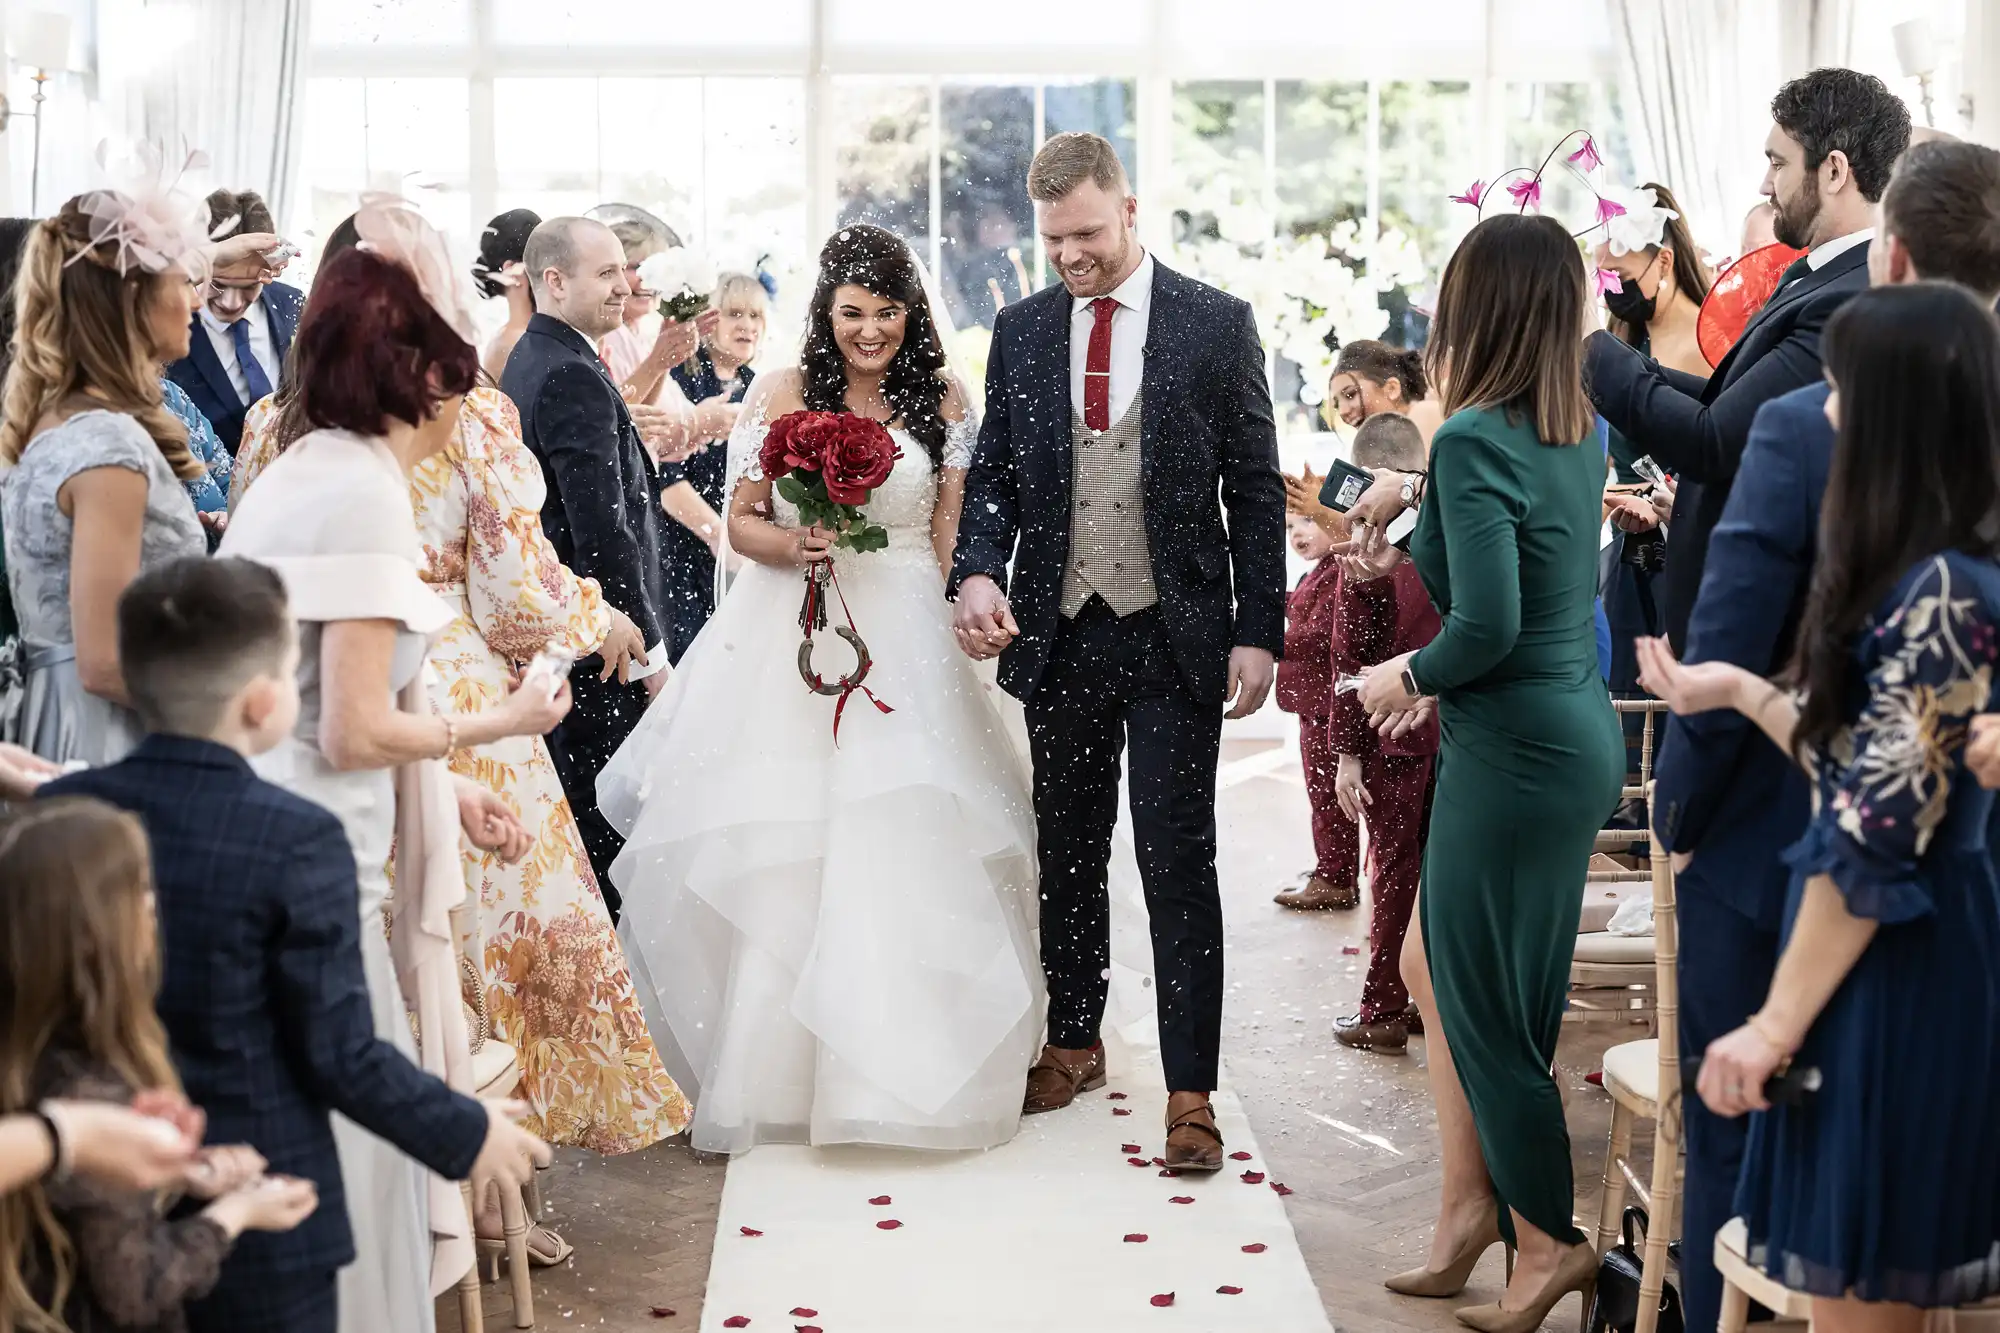 A bride and groom walk down the aisle holding hands, surrounded by guests celebrating and taking photos. The bride holds a bouquet of red roses, and flower petals are scattered on the floor.